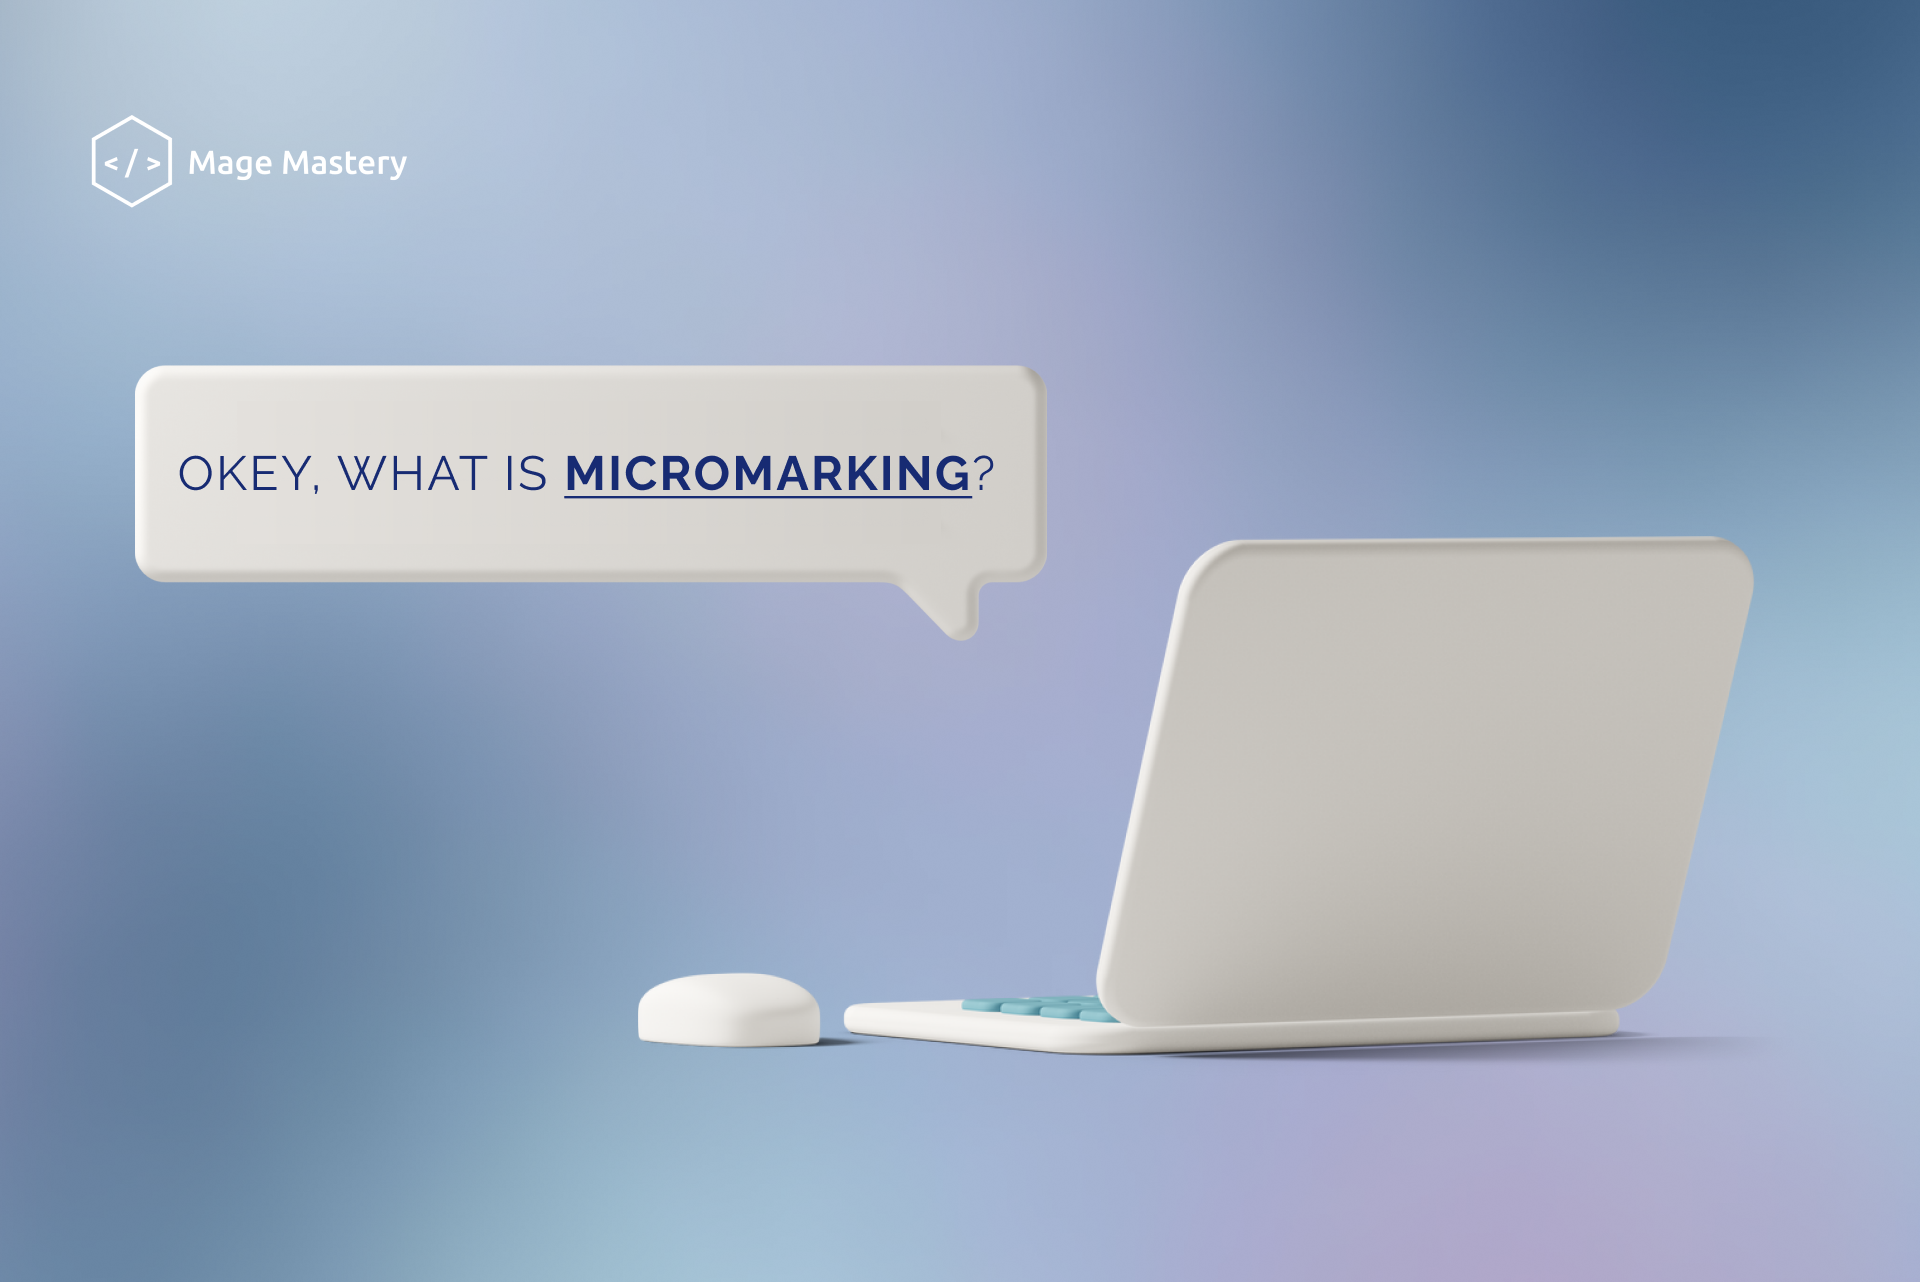 What is micromarking and why is it needed?